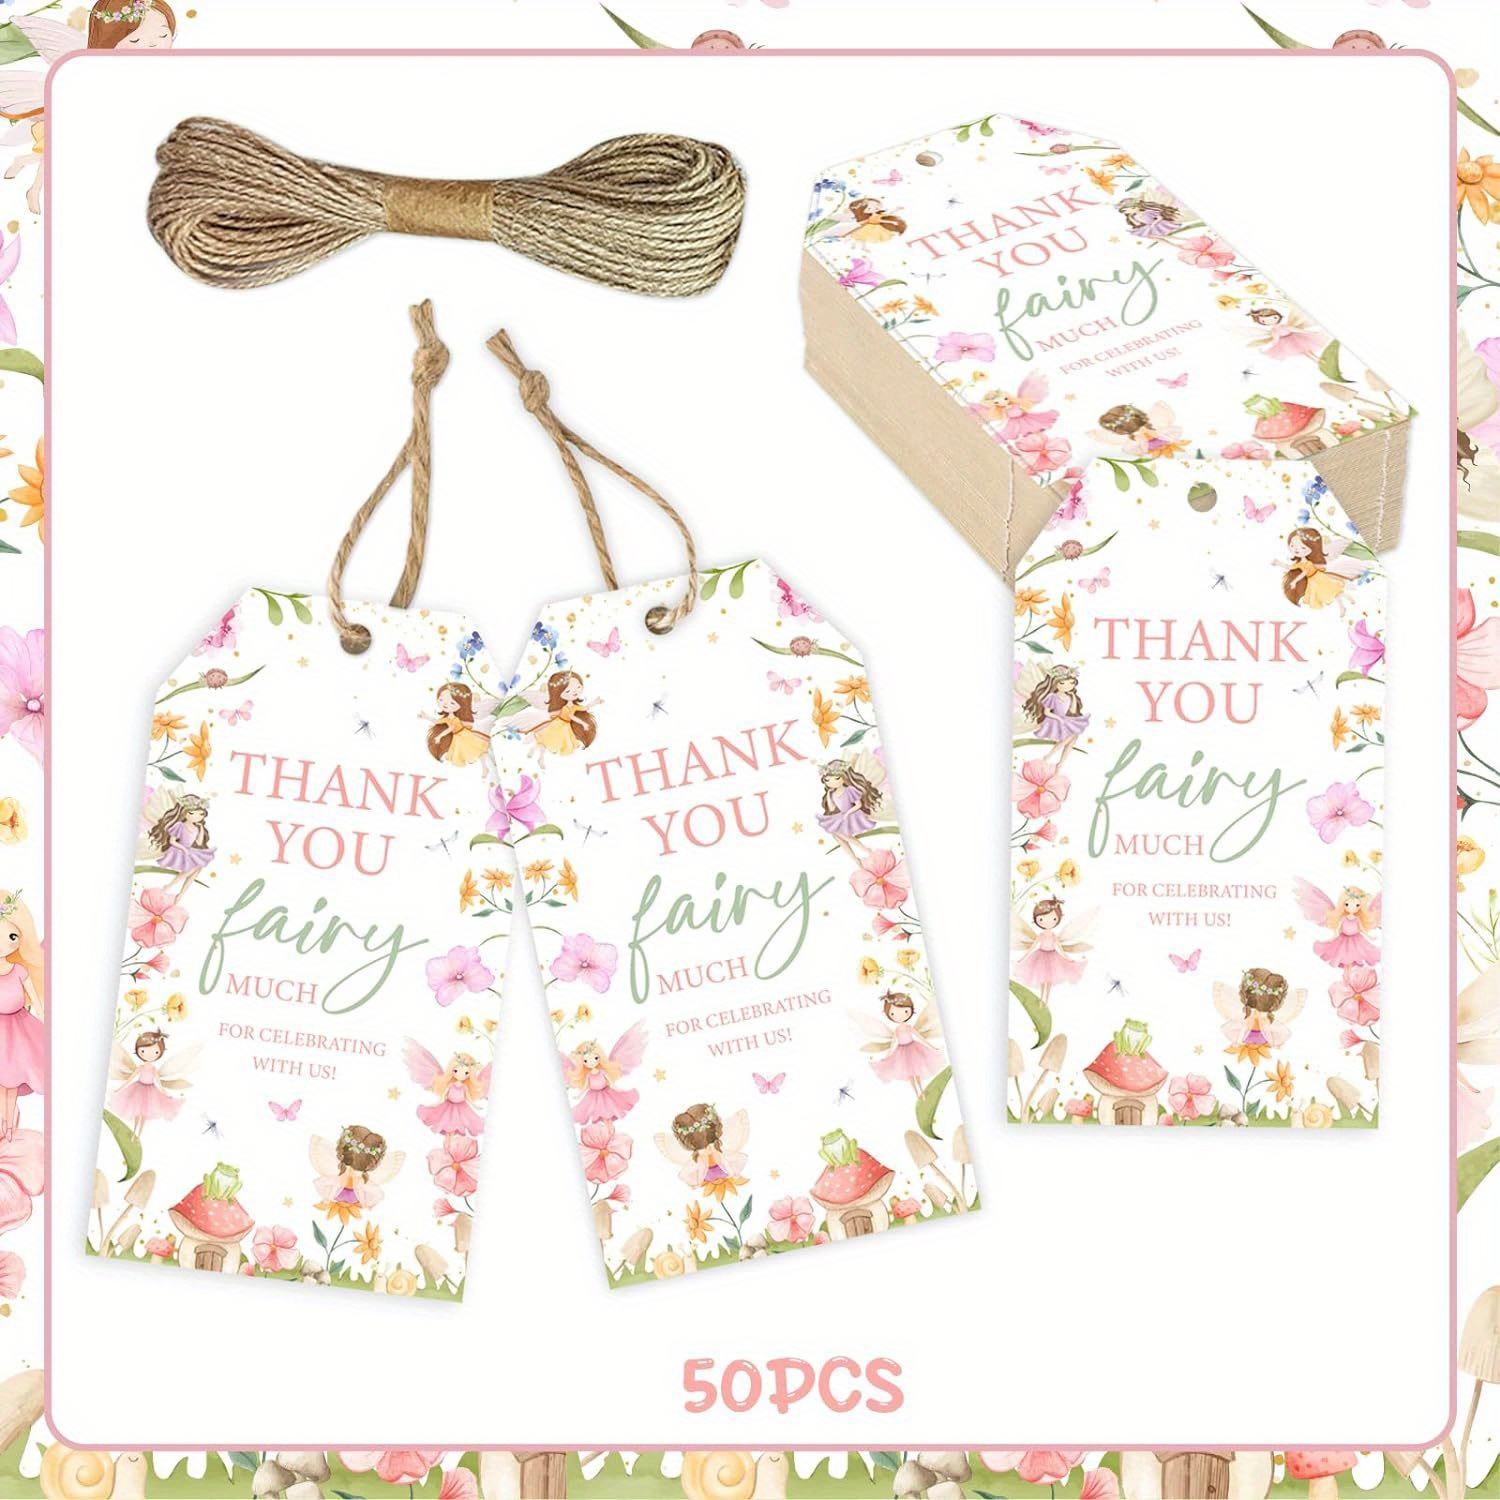 

50pcs Fairy Theme Celebration Gift Tags - Double-sided Thank You Favor Tags For Birthday, Baby Shower, Wedding, Bridal Party - Floral Design With Jute Twine Included